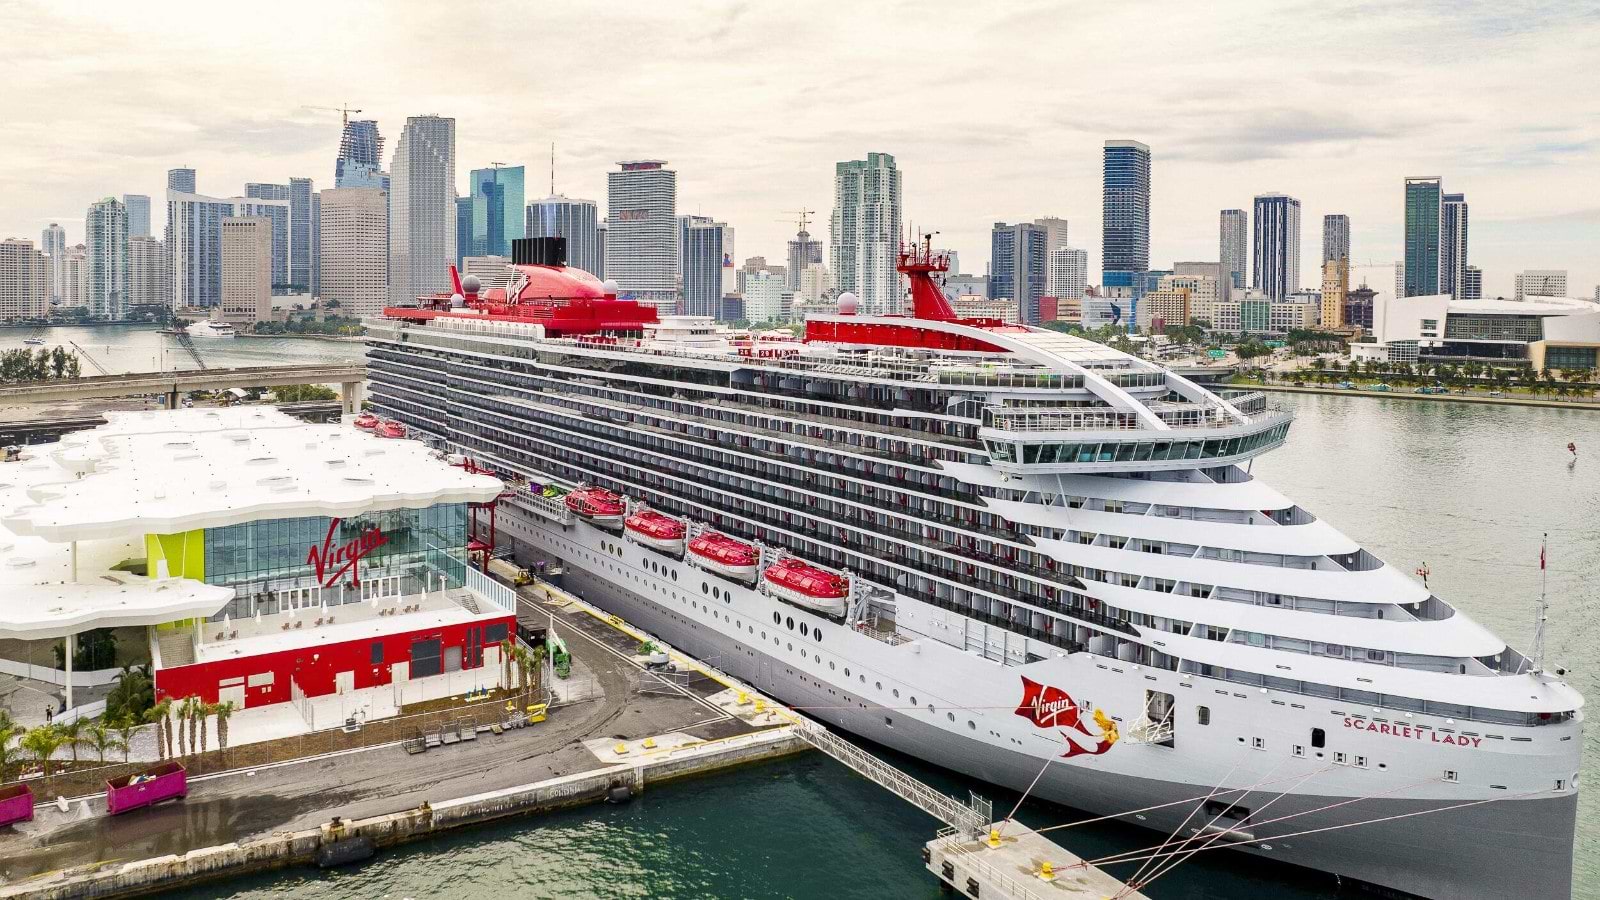 Image of Scarlet Lady at Terminal V-5, sourced from: Virgin Voyages https://cdn1.speedsize.com/eb8d0010-7300-4129-8a6d-74bc221f9caf/https://www.virginvoyages.com/.imaging/desktop/dam/037f4590-5c31-4640-aed6-9aa654bc95fb/Photo/Terminal-V/Scarlet-Lady-at-Terminal-V-5.JPG.JPG